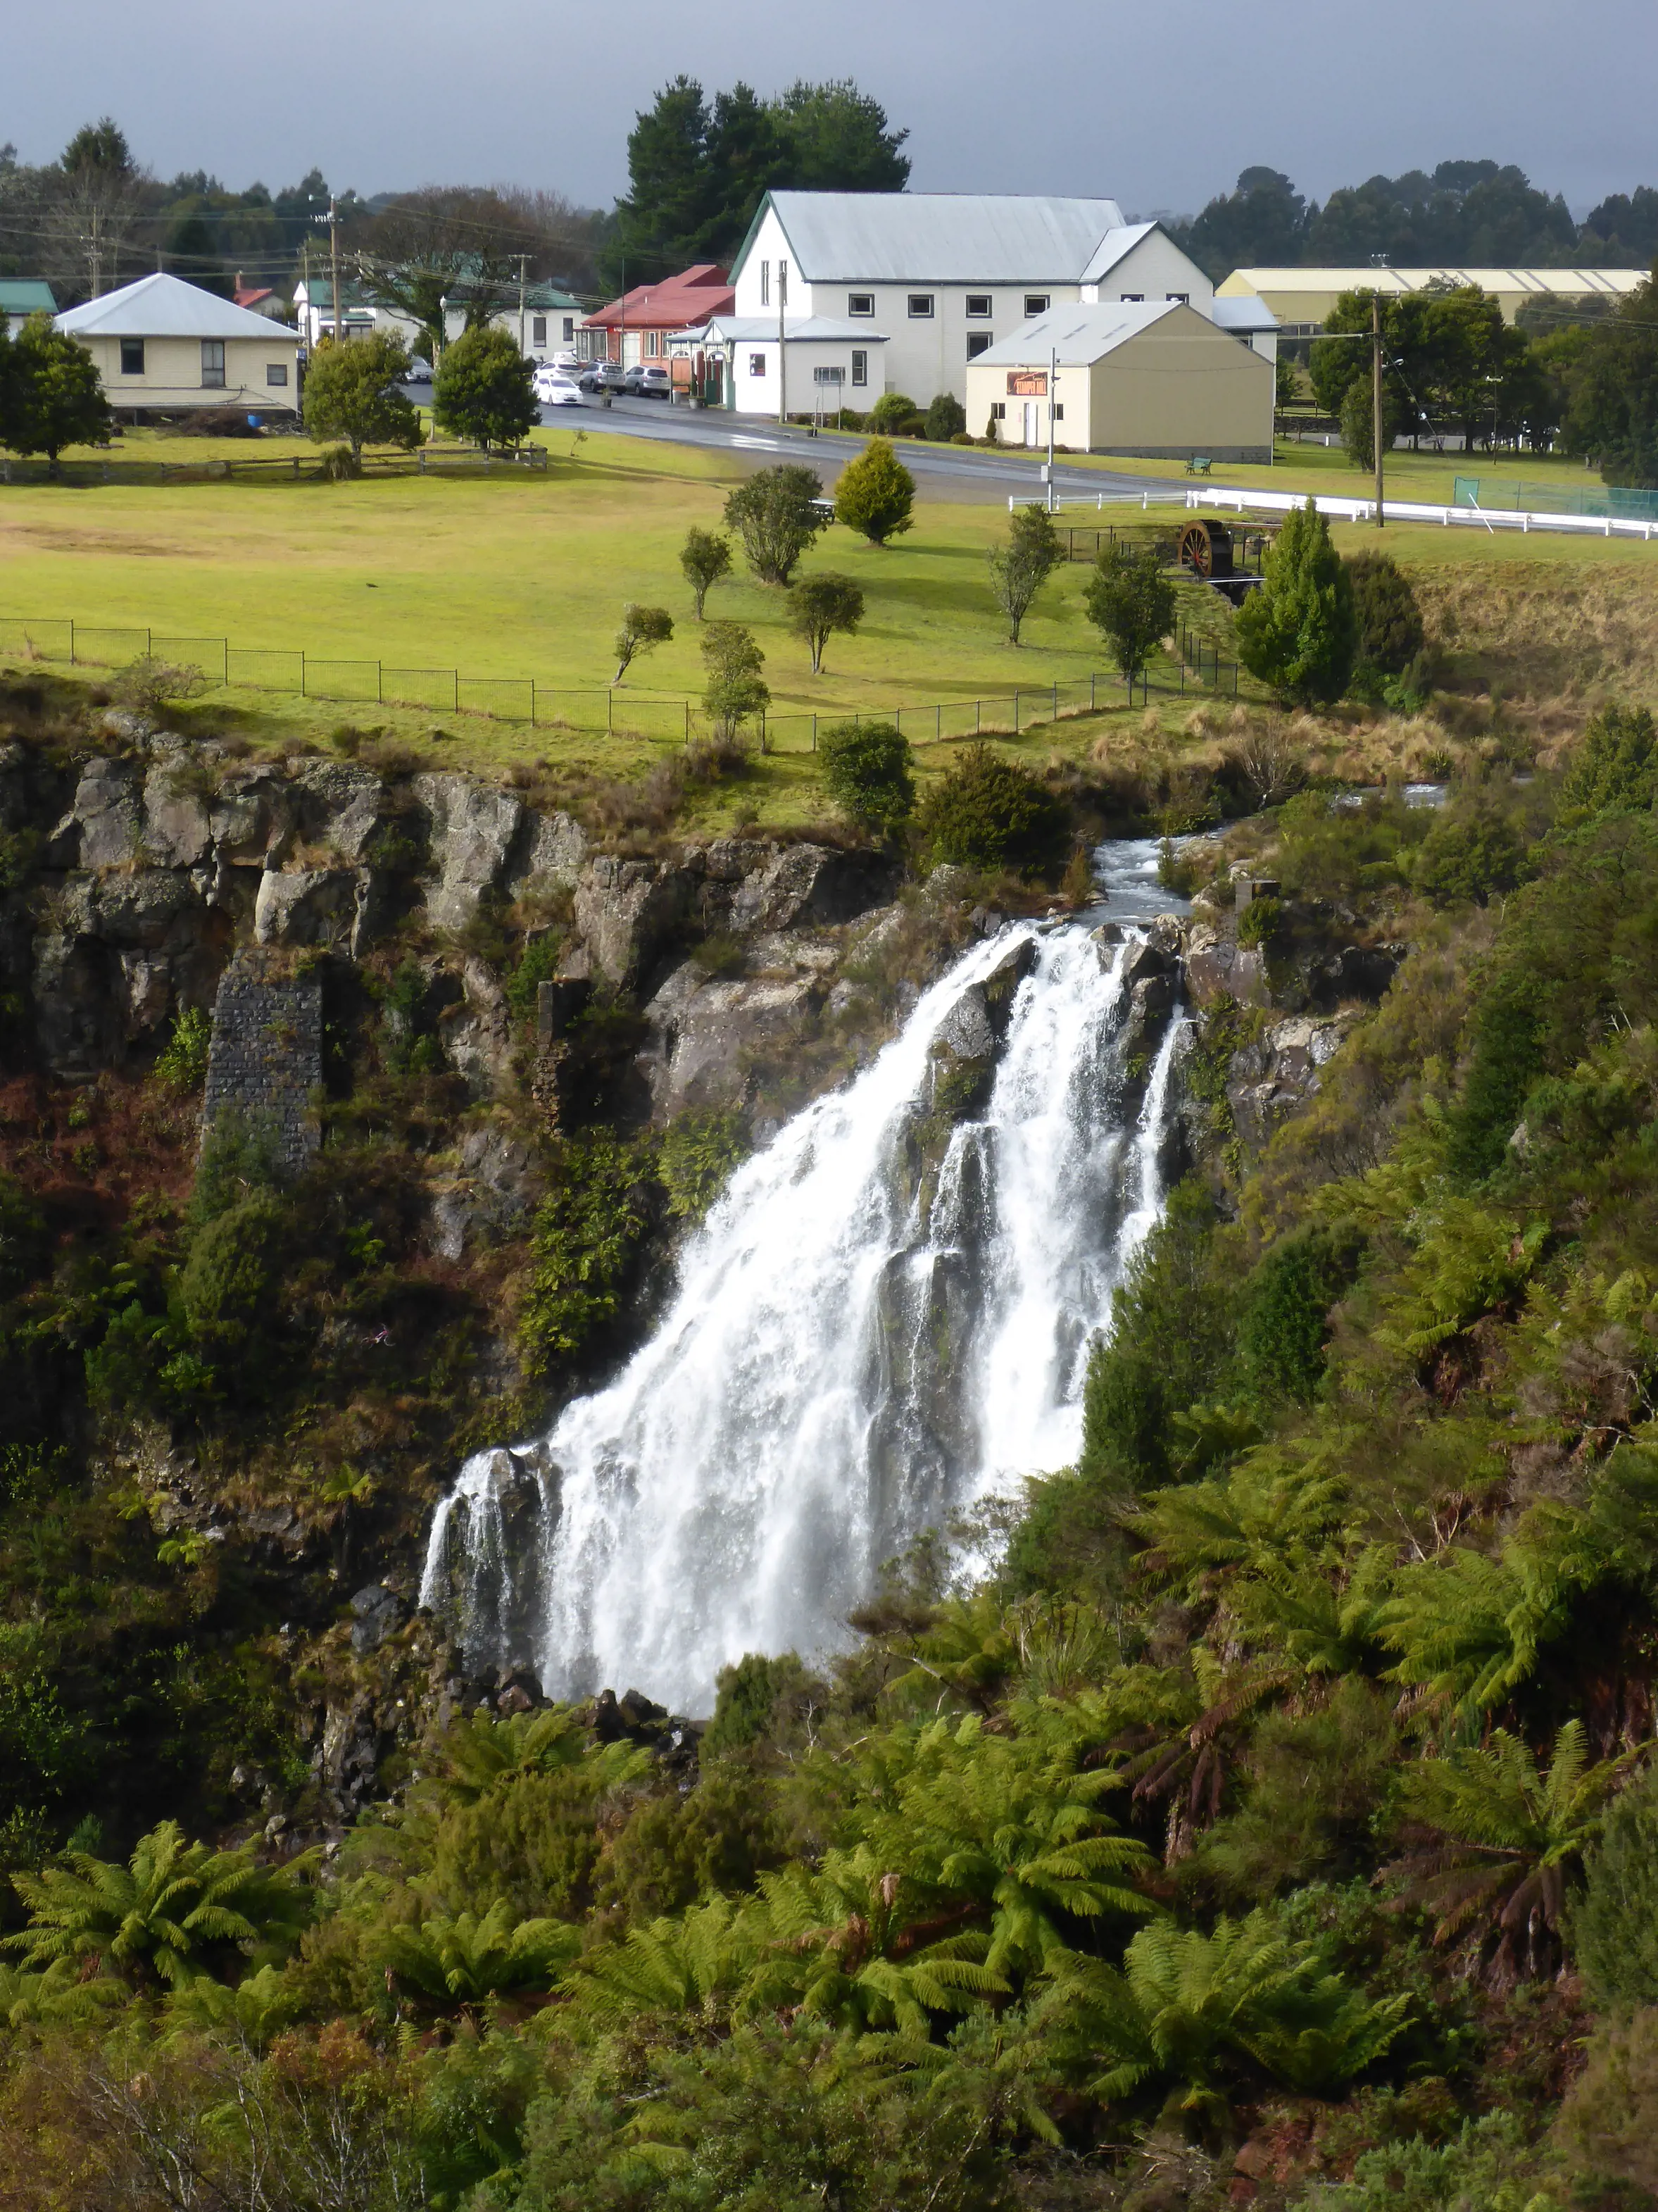 Waratah Falls sits in the centre of the image with buildings from the historic town of Warath sit above in the background while ferns fill the foreground.